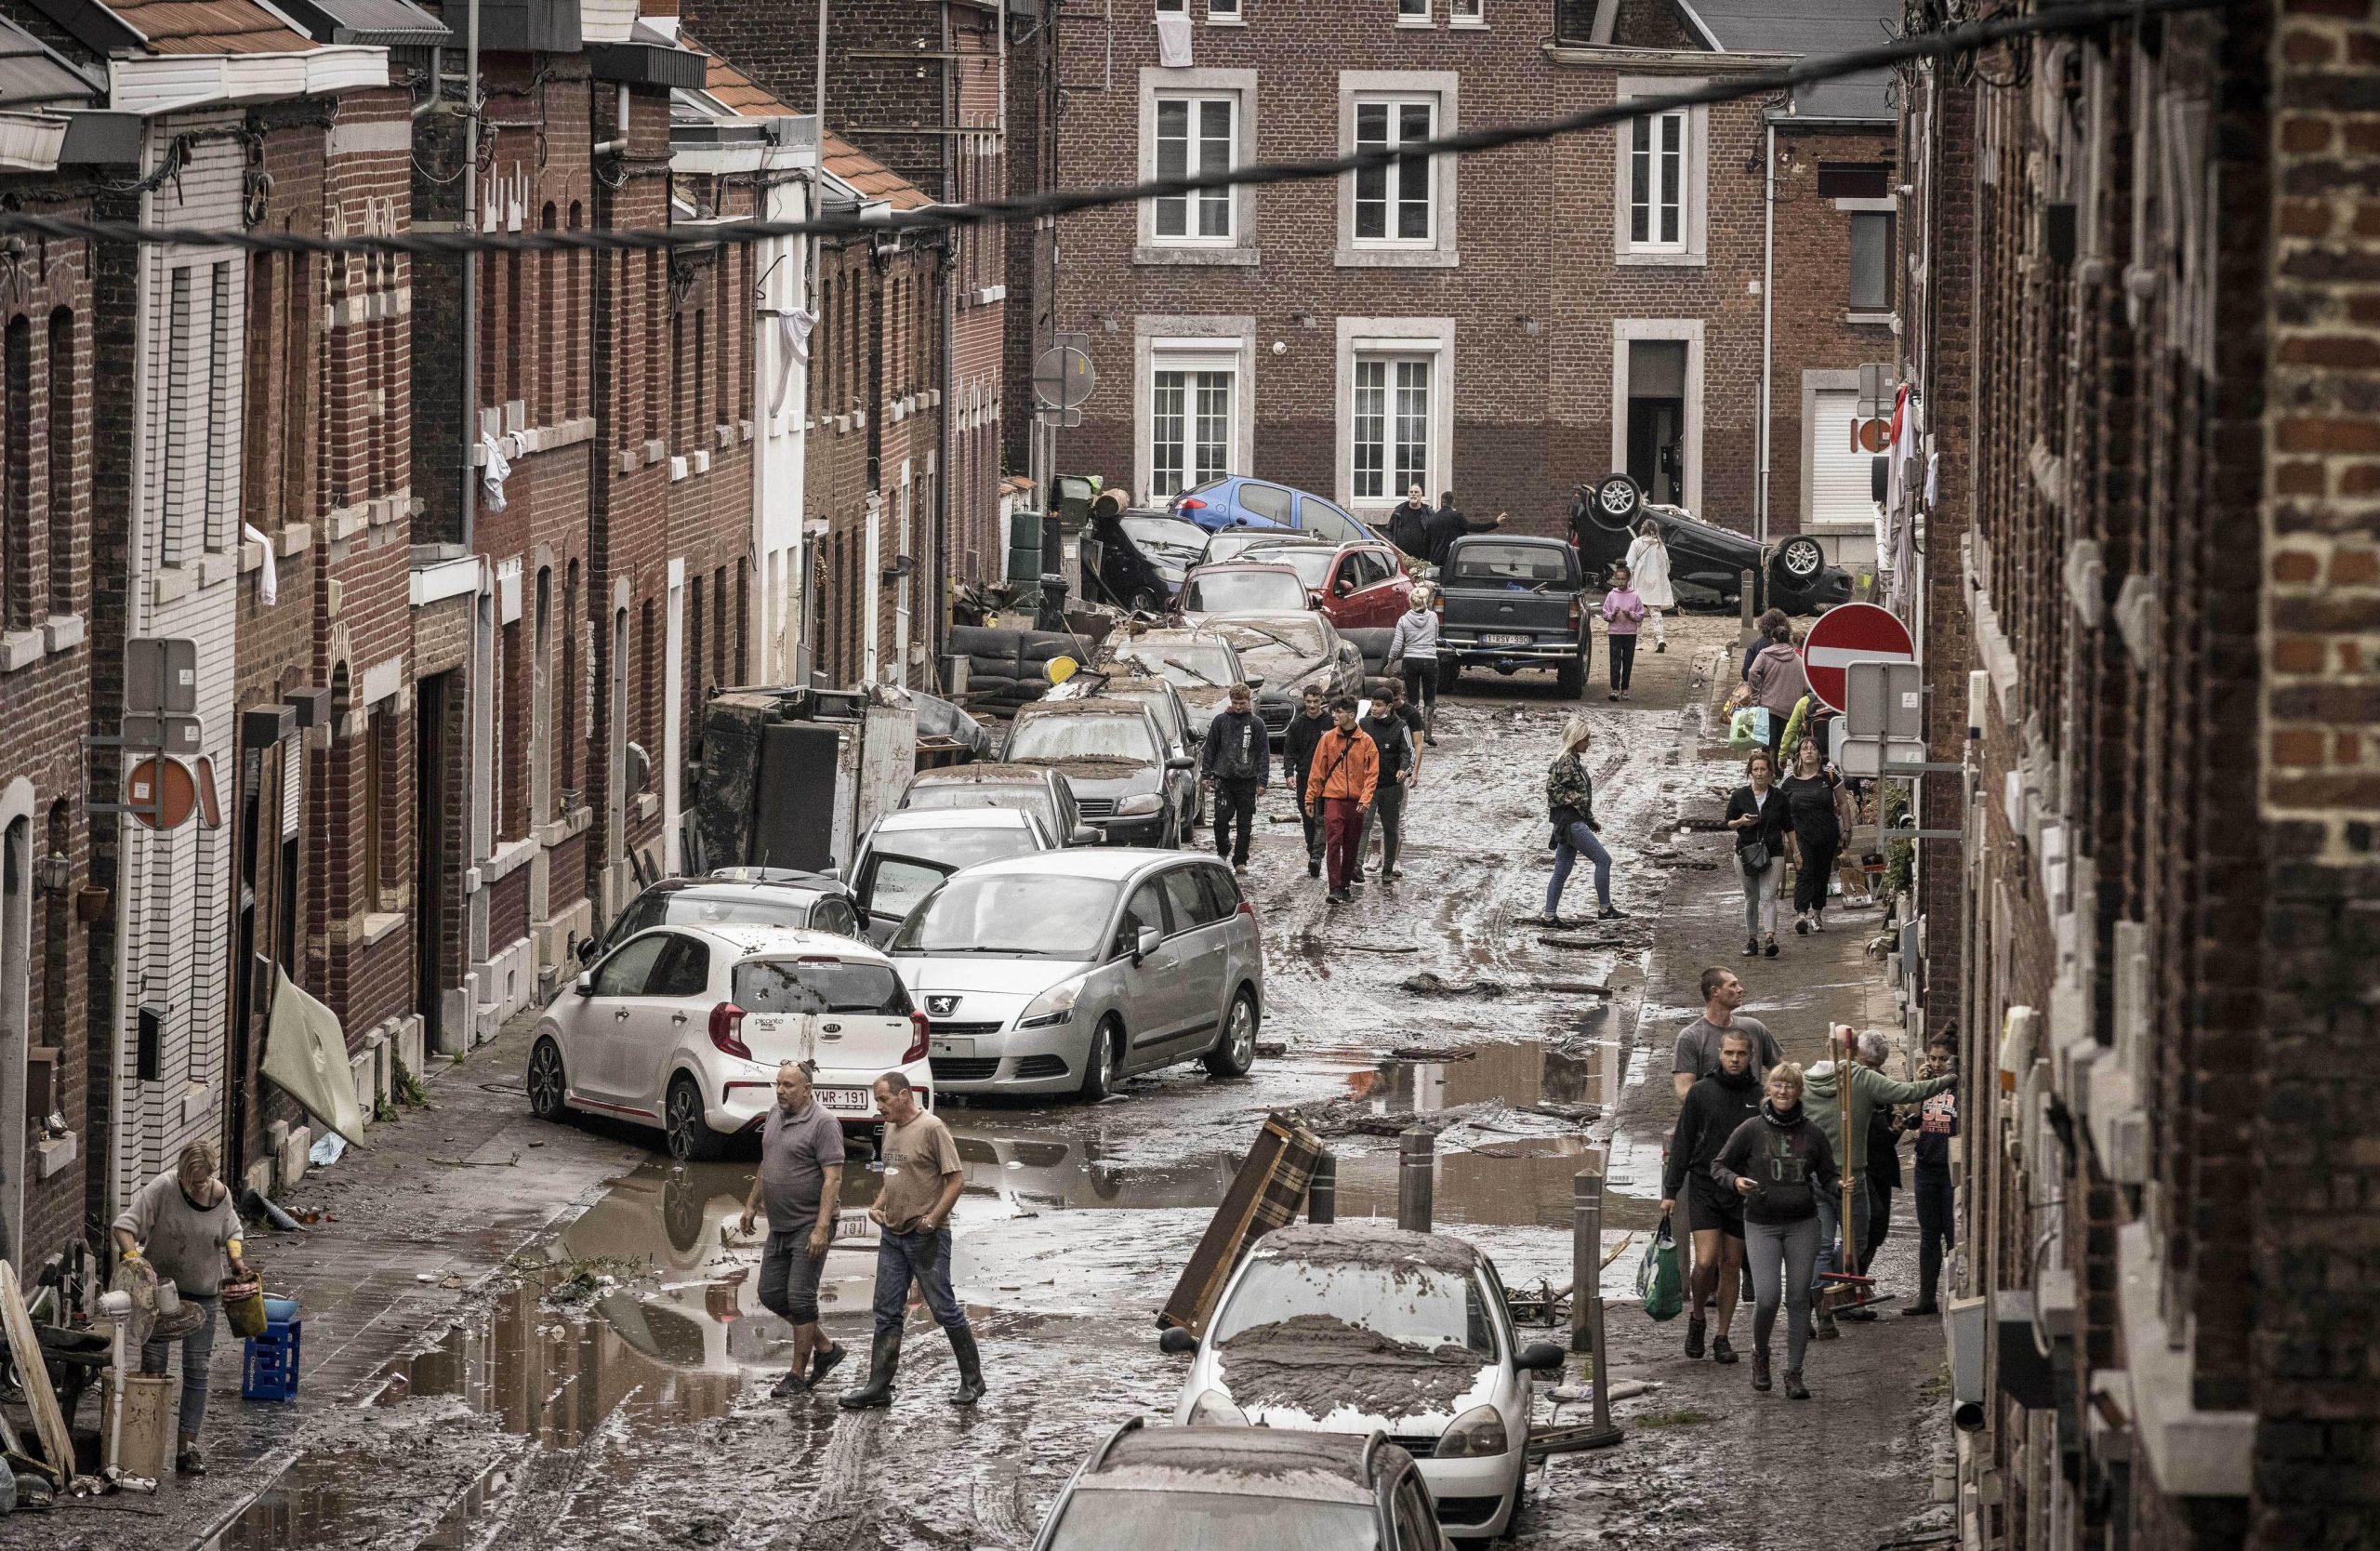 Why have the floods in Europe been so deadly?